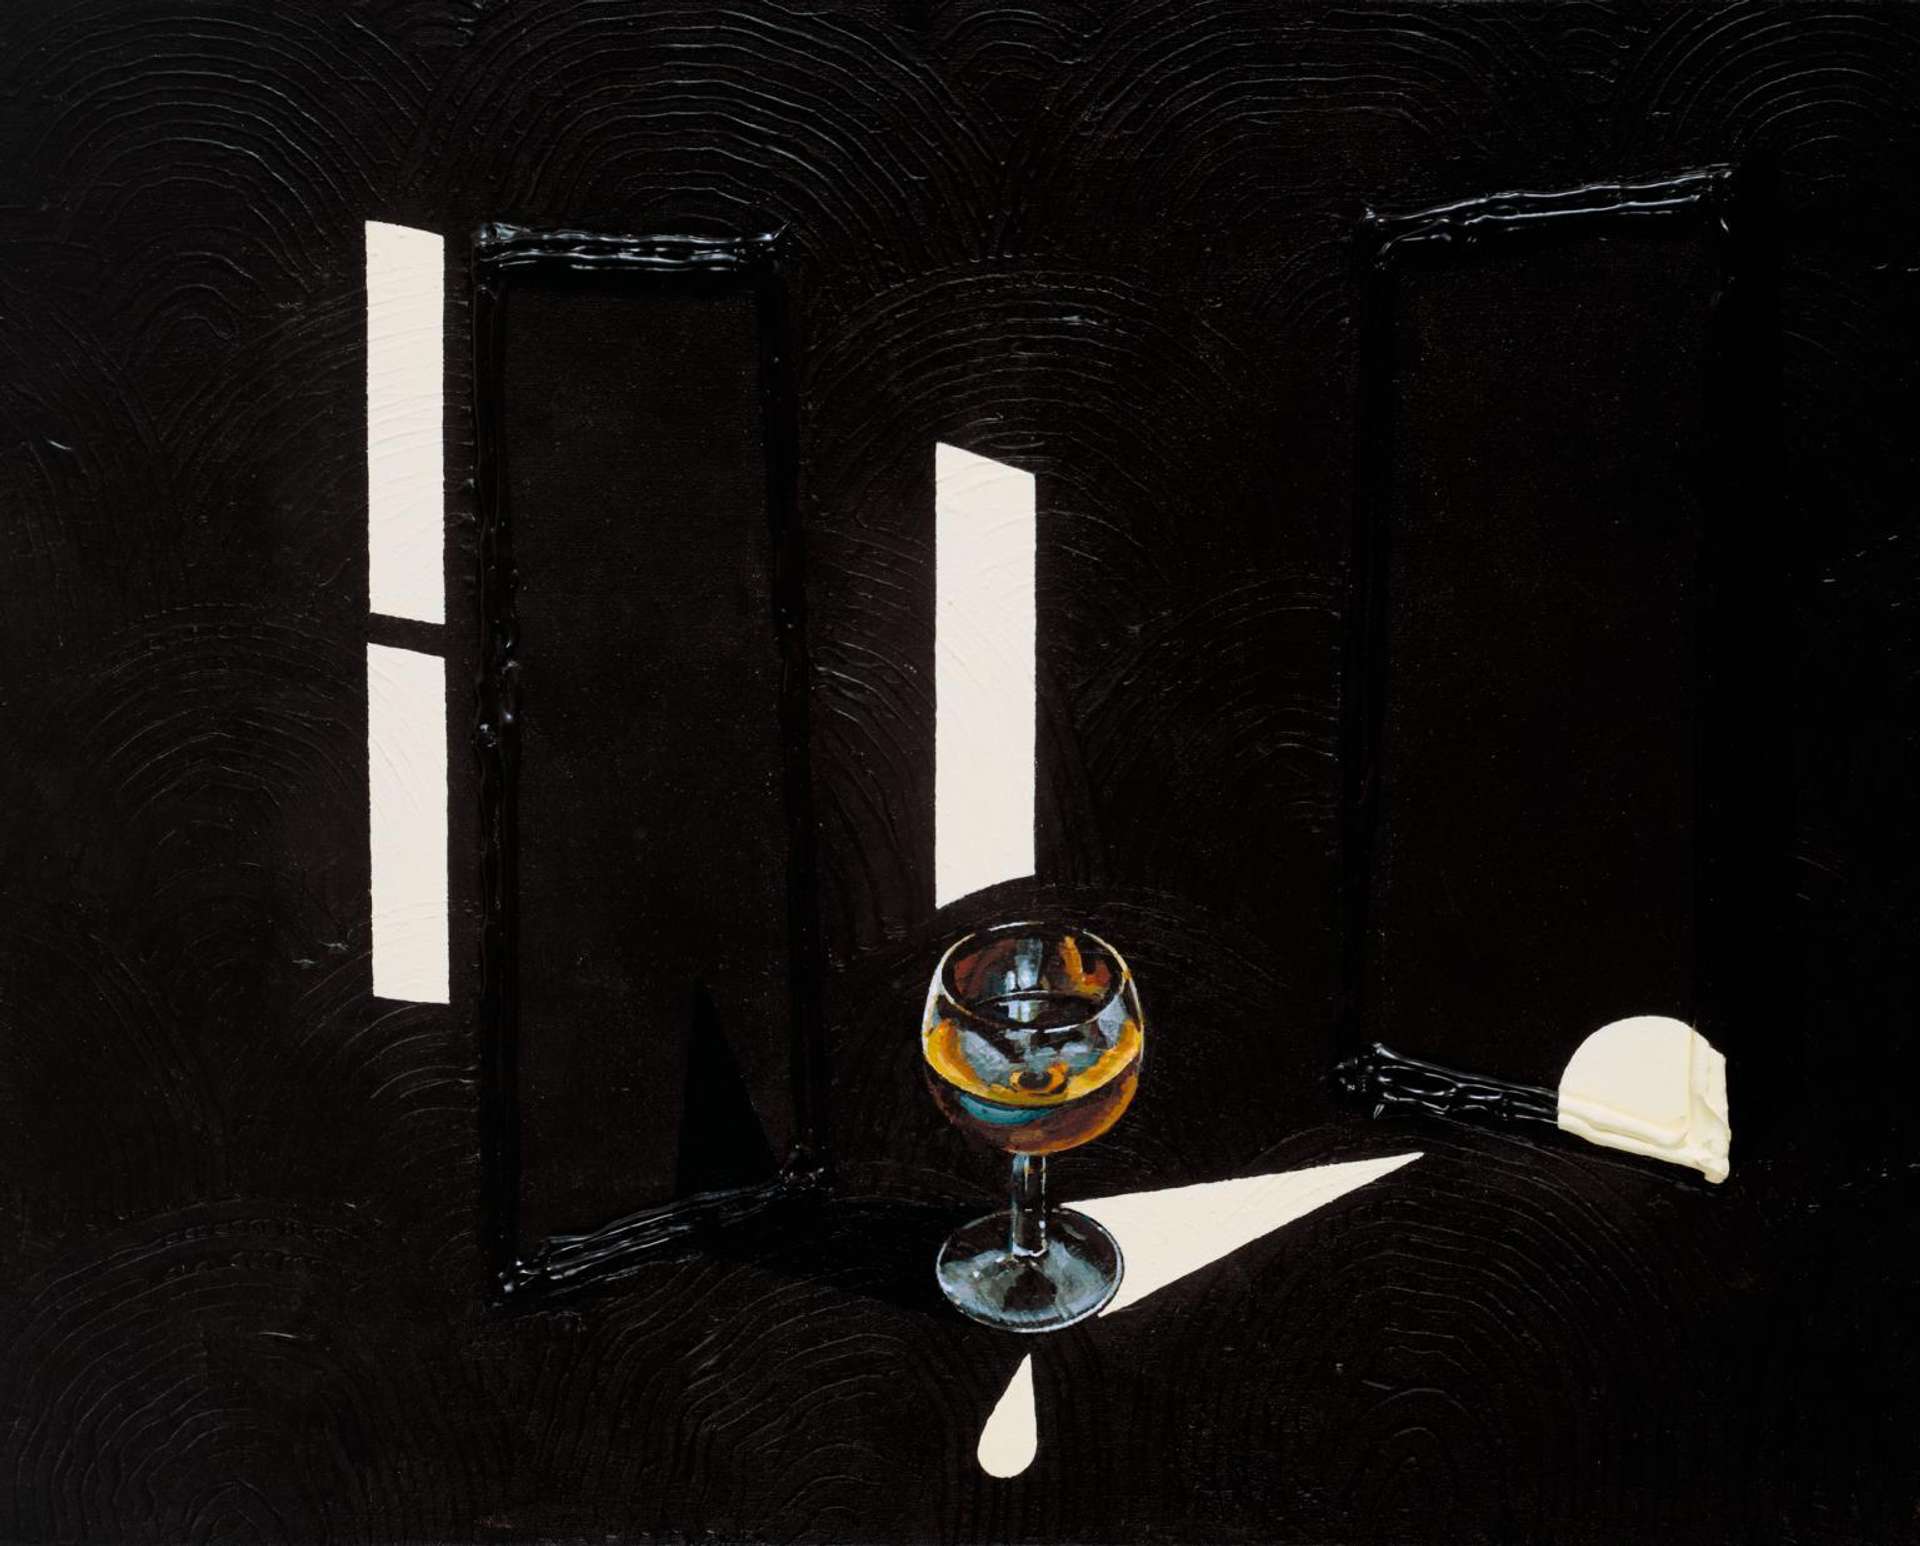 A painting by the artist Patrick Caulfield showing a single photorealistic glass of whisky, contrasting against white highlights depicting windows and light against a black background.